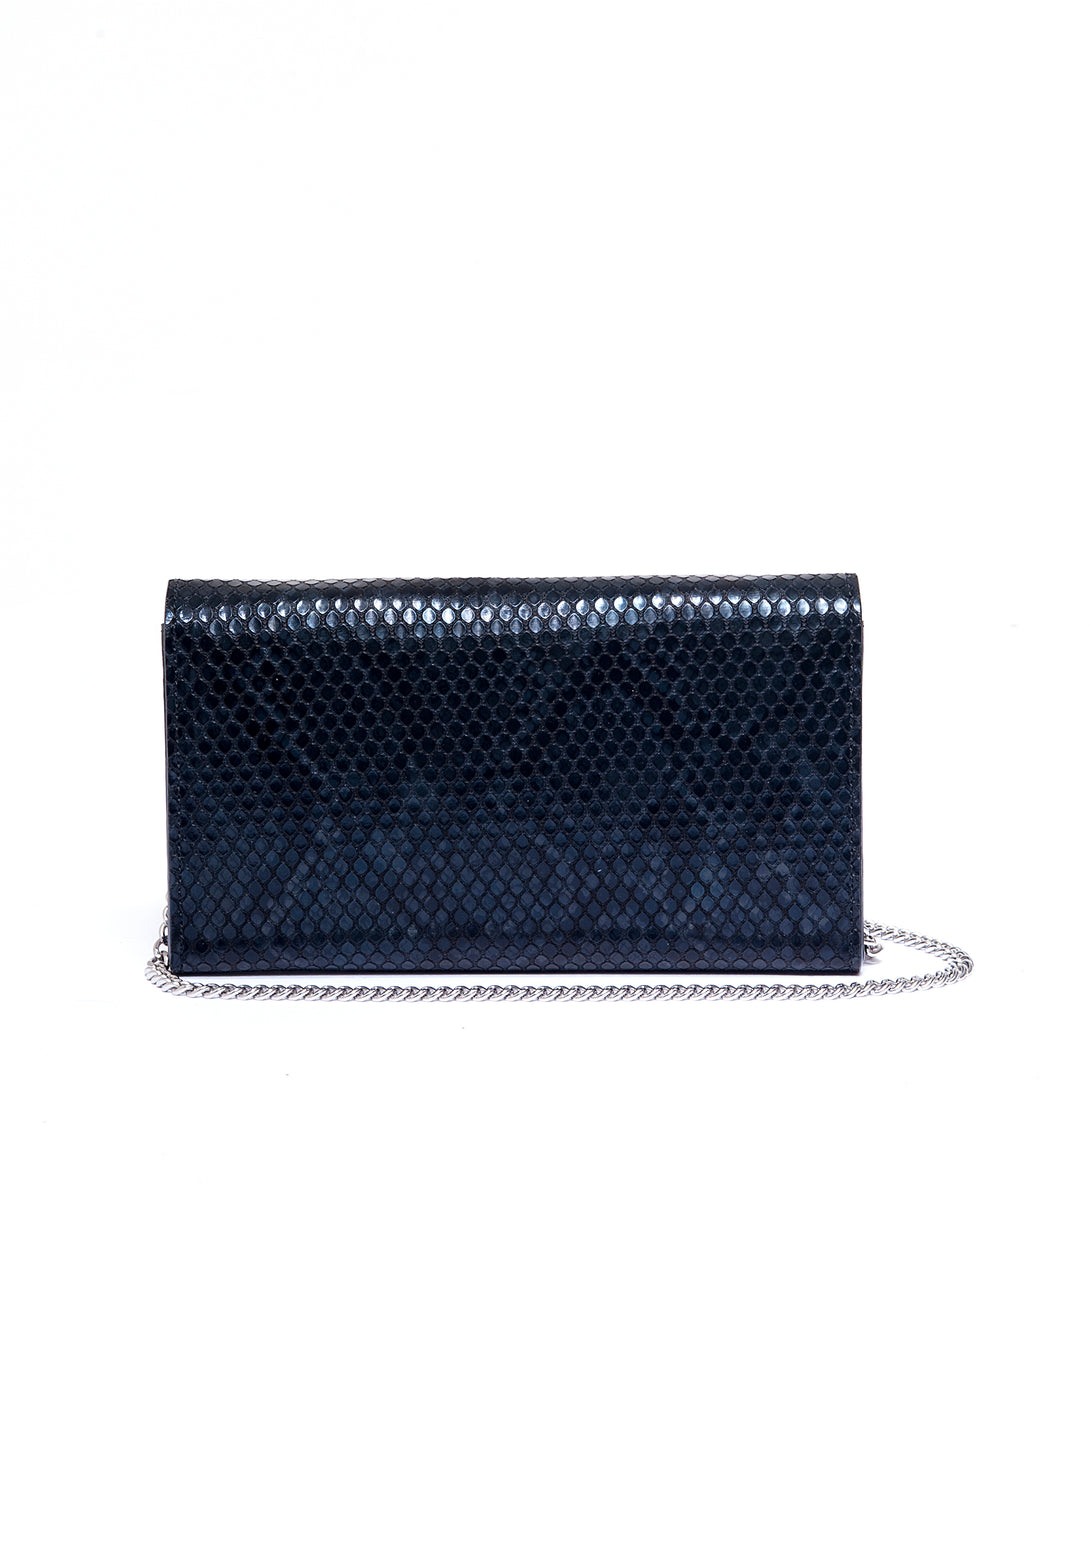 Pochette bag made in eco leather with python print